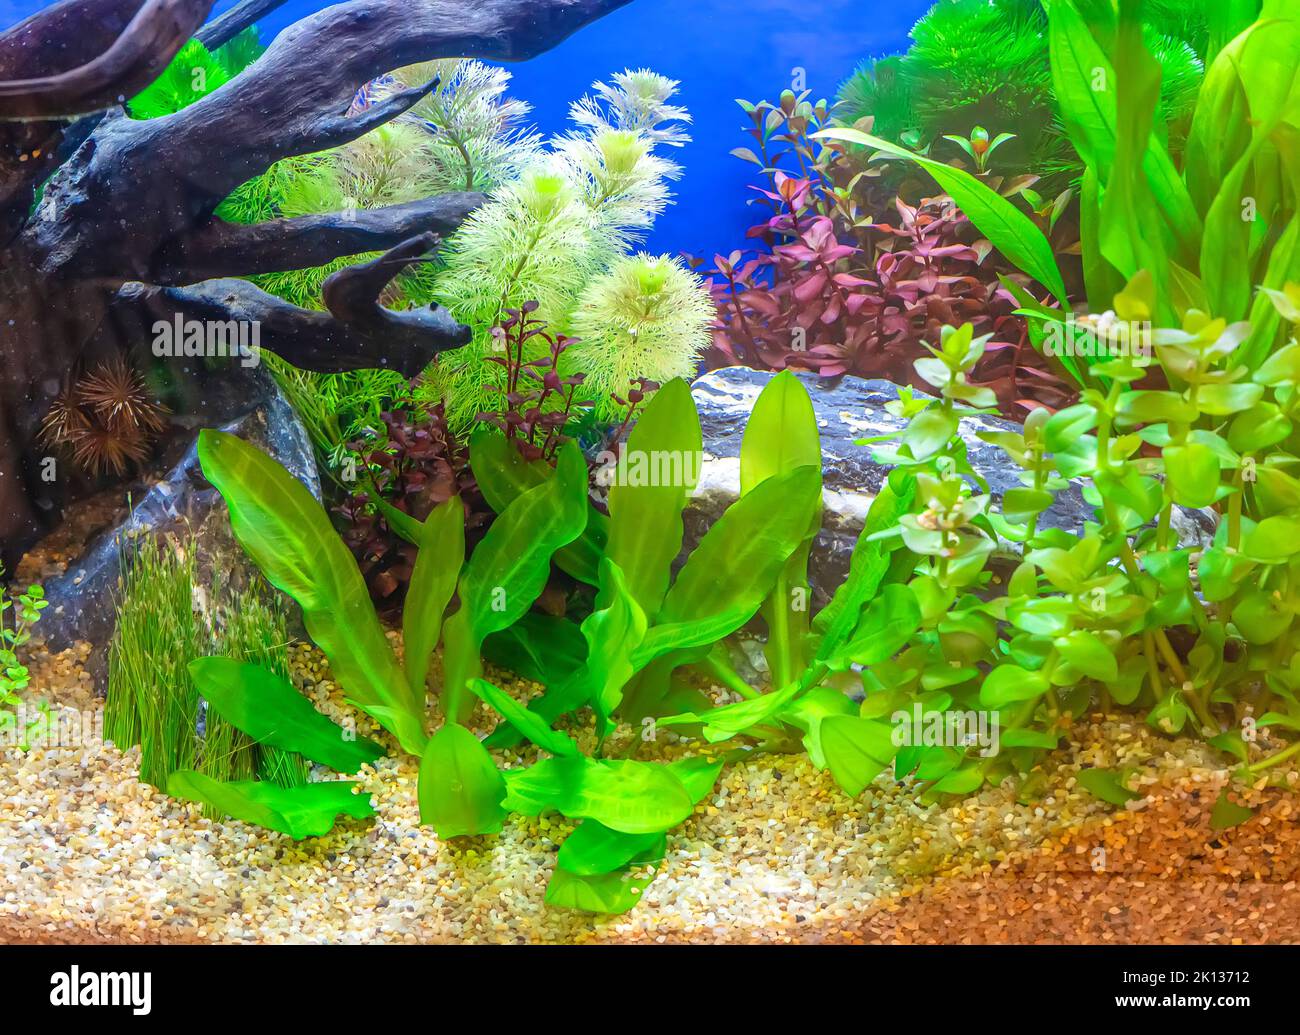 https://c8.alamy.com/comp/2K13712/underwater-landscape-nature-forest-style-aquarium-tank-with-a-variety-of-aquatic-plants-stones-and-herb-decorations-2K13712.jpg